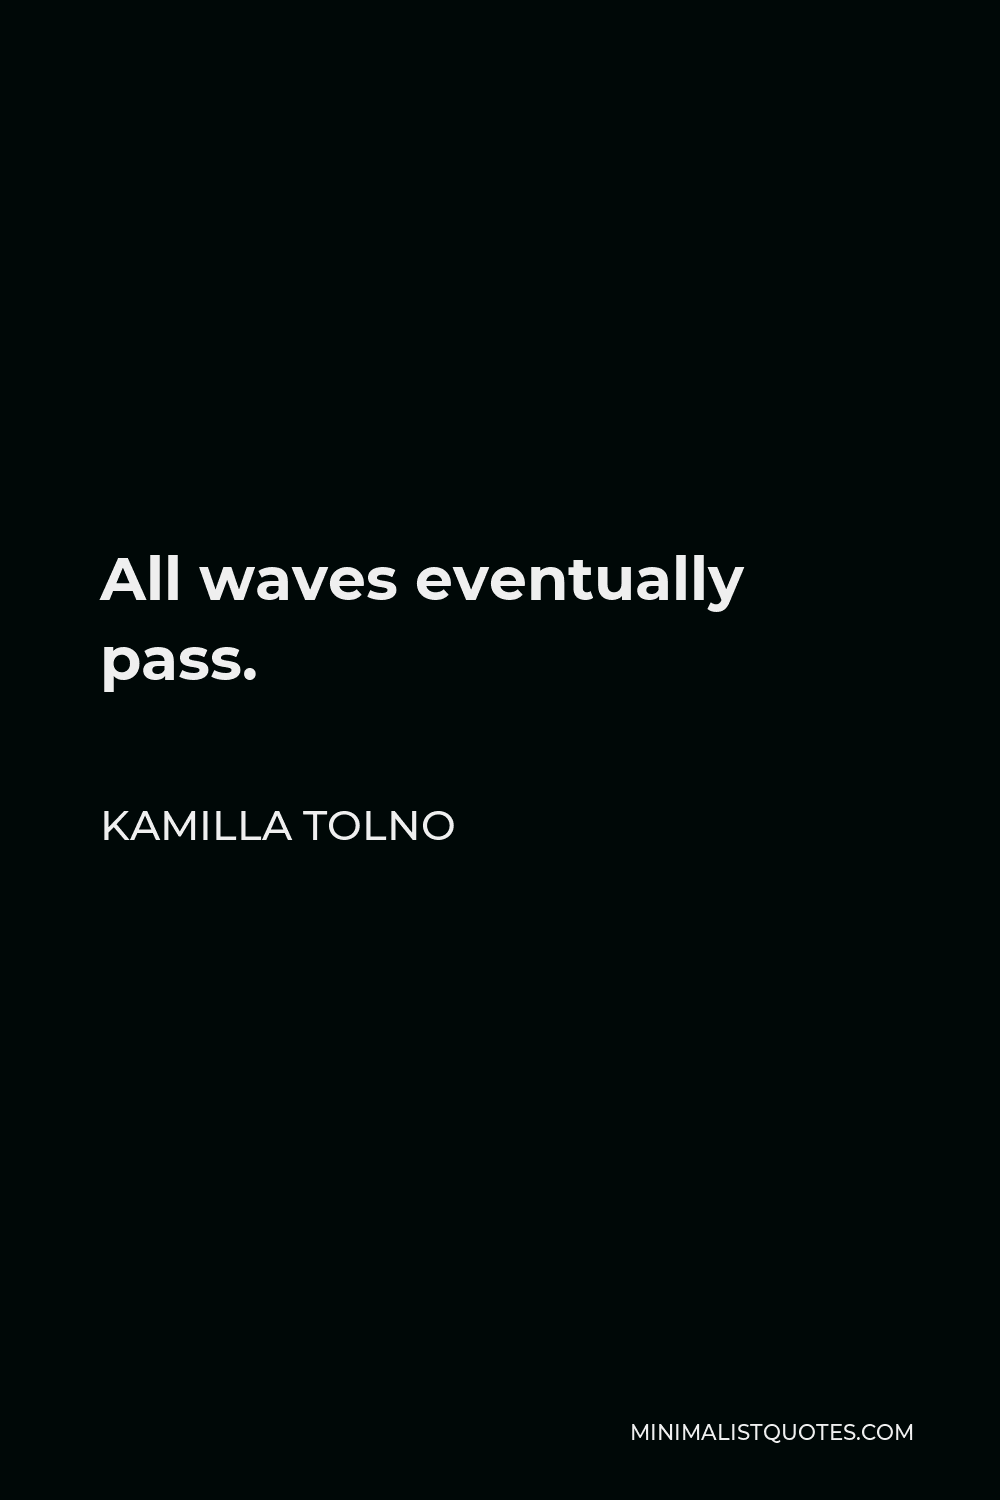 Kamilla Tolno Quote - All waves eventually pass.